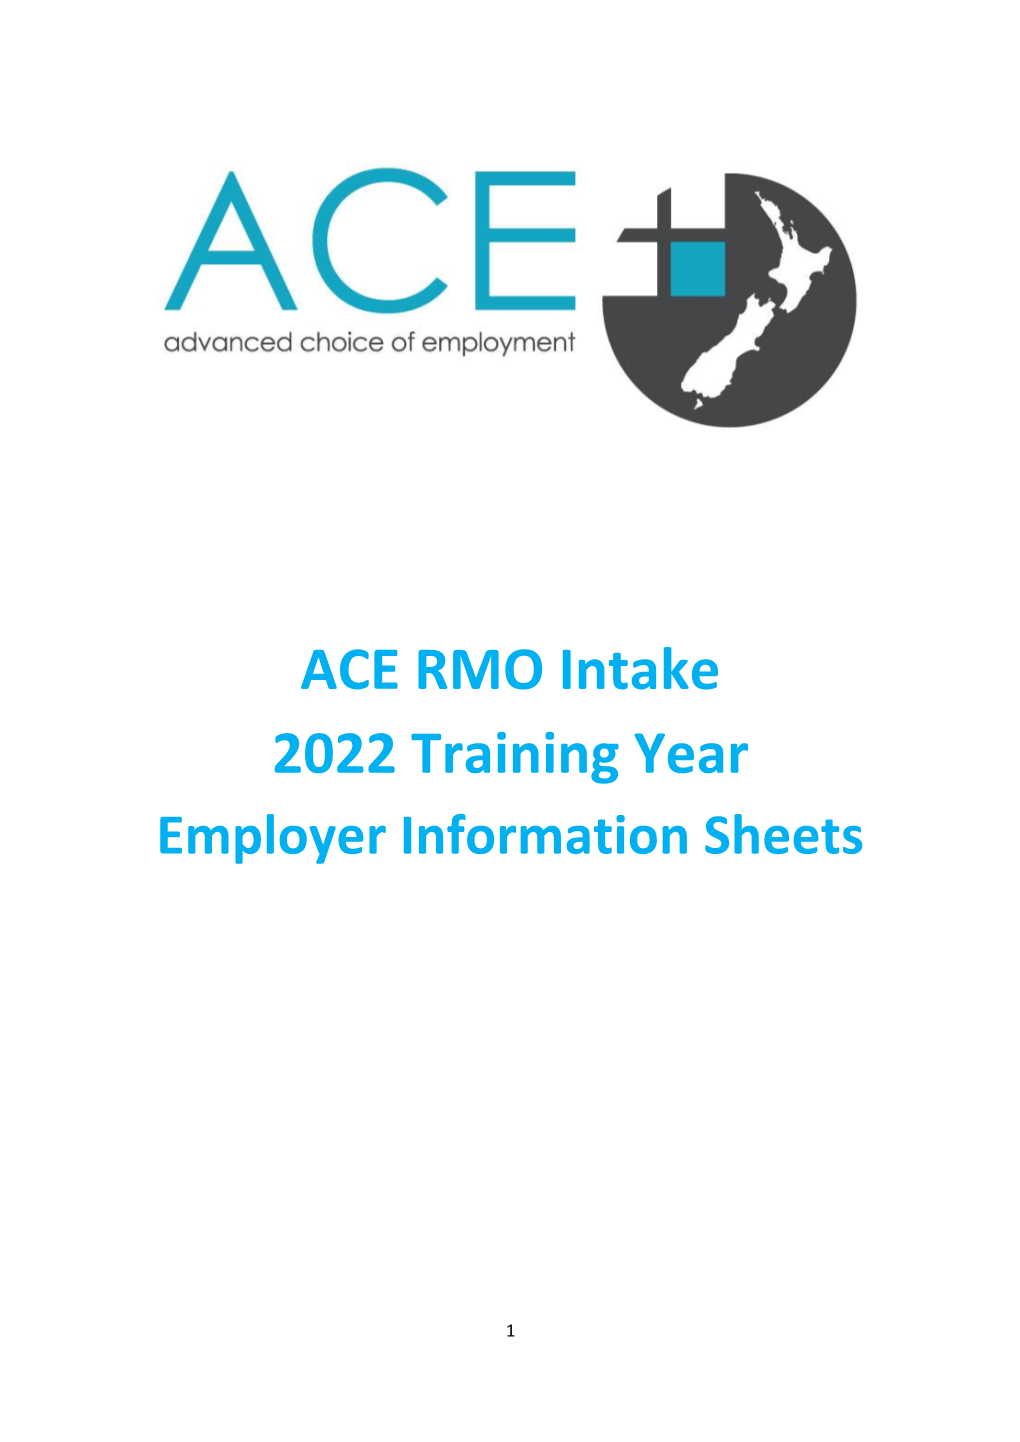 ACE RMO Employer Information Sheets